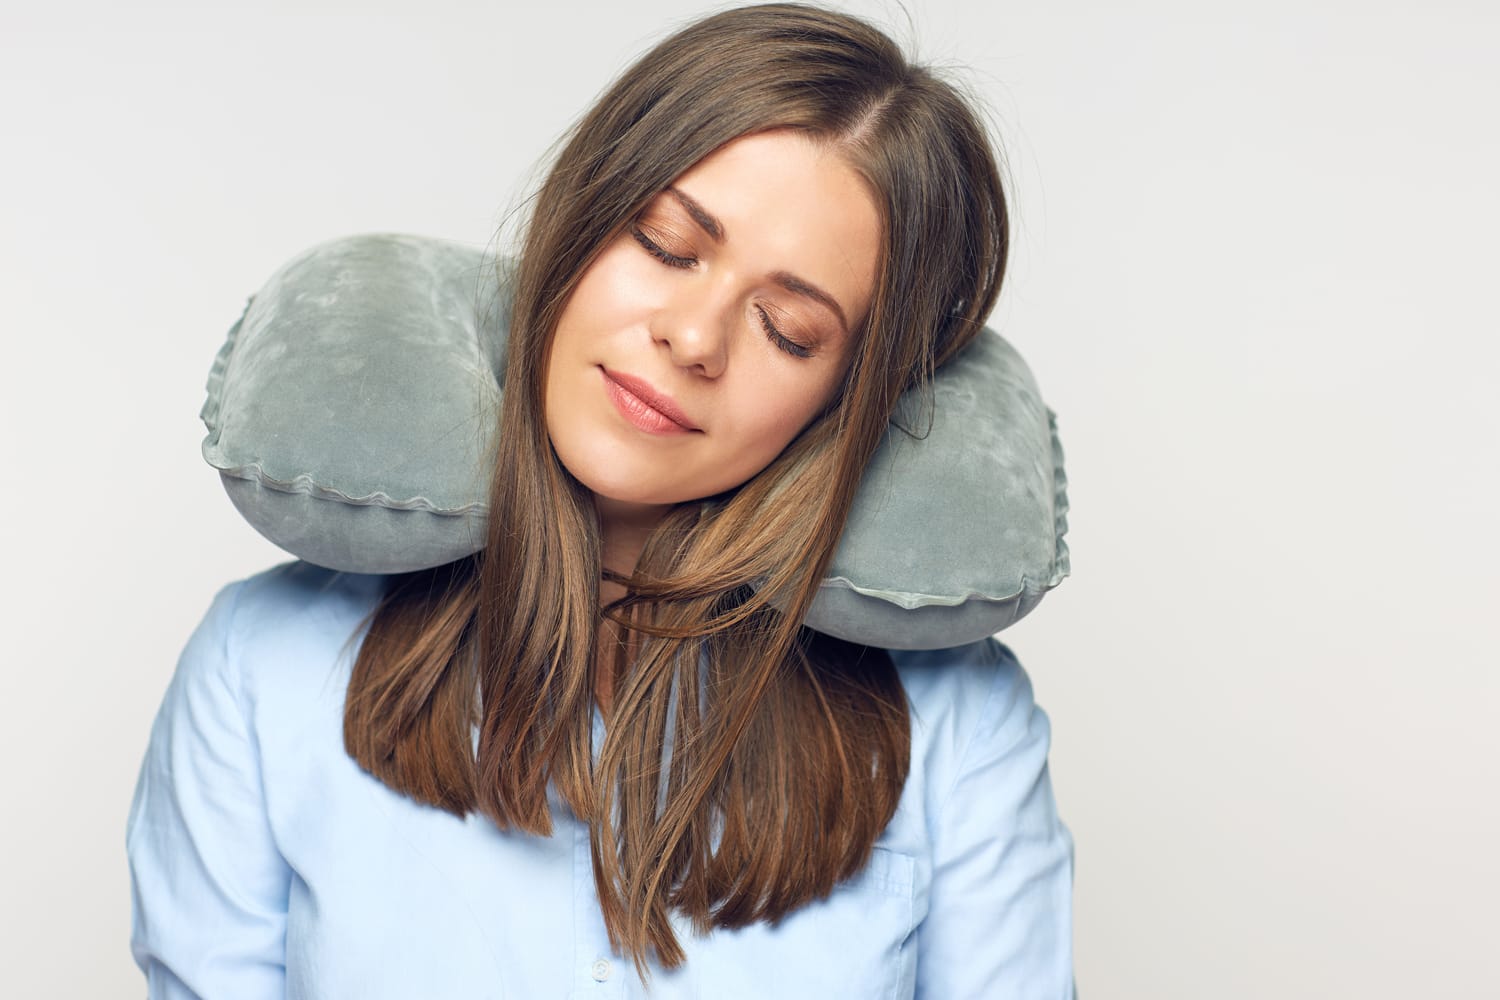 Lightweight Easily Portable KOBWA Travel Pillow with Hoodie U Shaped Neck Pillow for Airplane Car or Train Travel for Men Women Kids